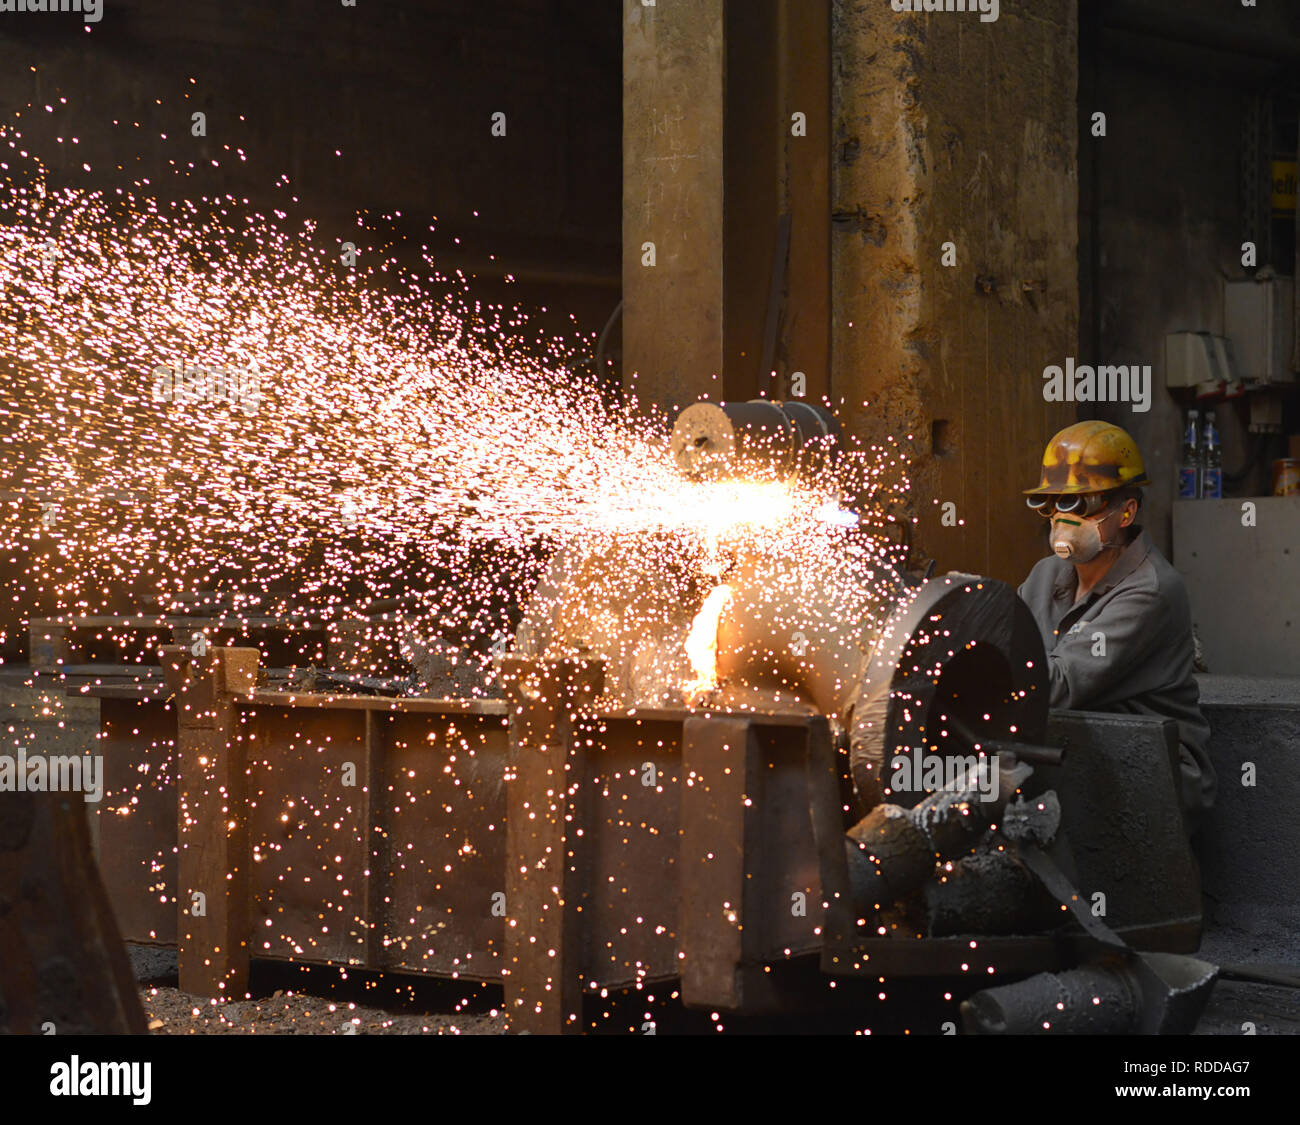 Berlin, Germany - April 18, 2013: Production of metal components in a foundry - worker Stock Photo